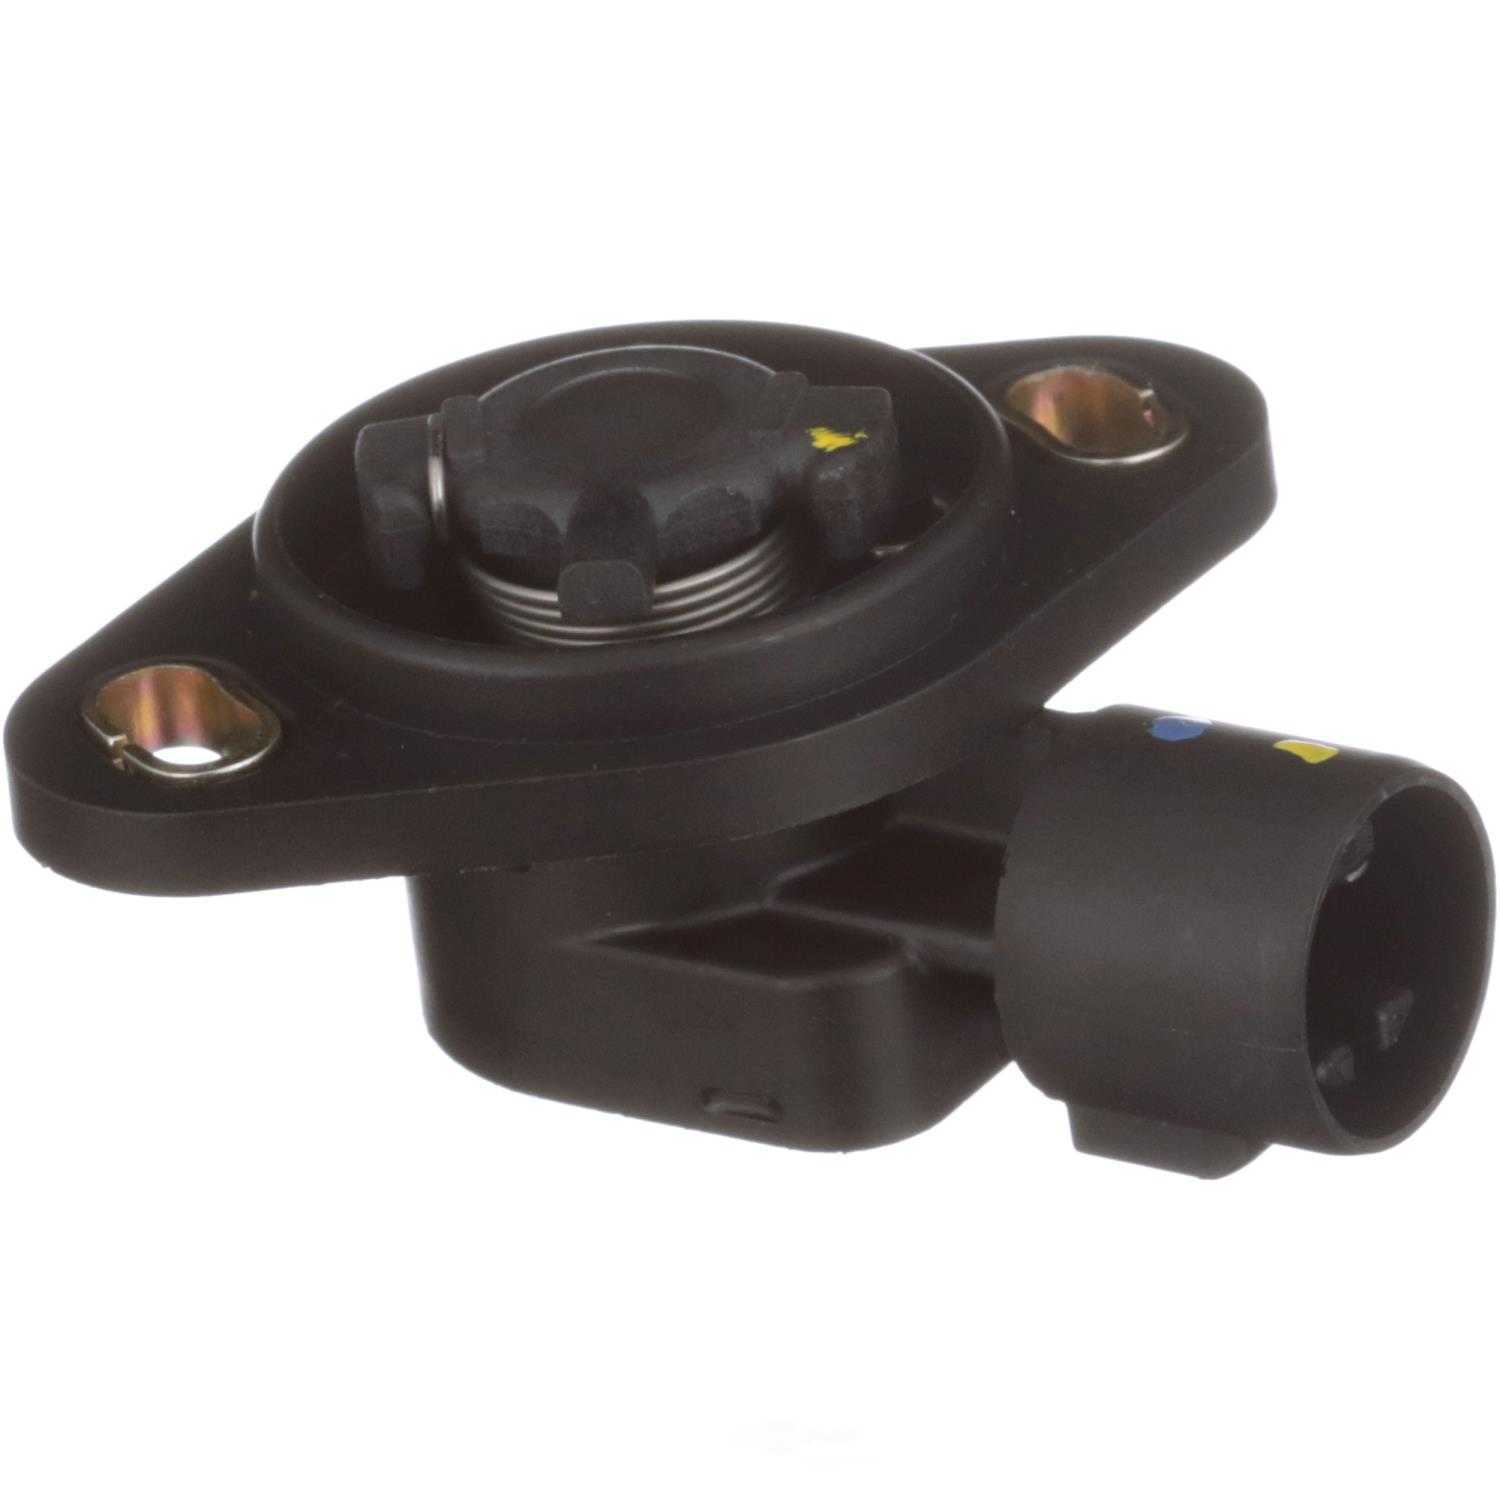  ACDelco GM Original Equipment 19259452 Throttle Position Sensor  Kit with Clips and Cover : Automotive